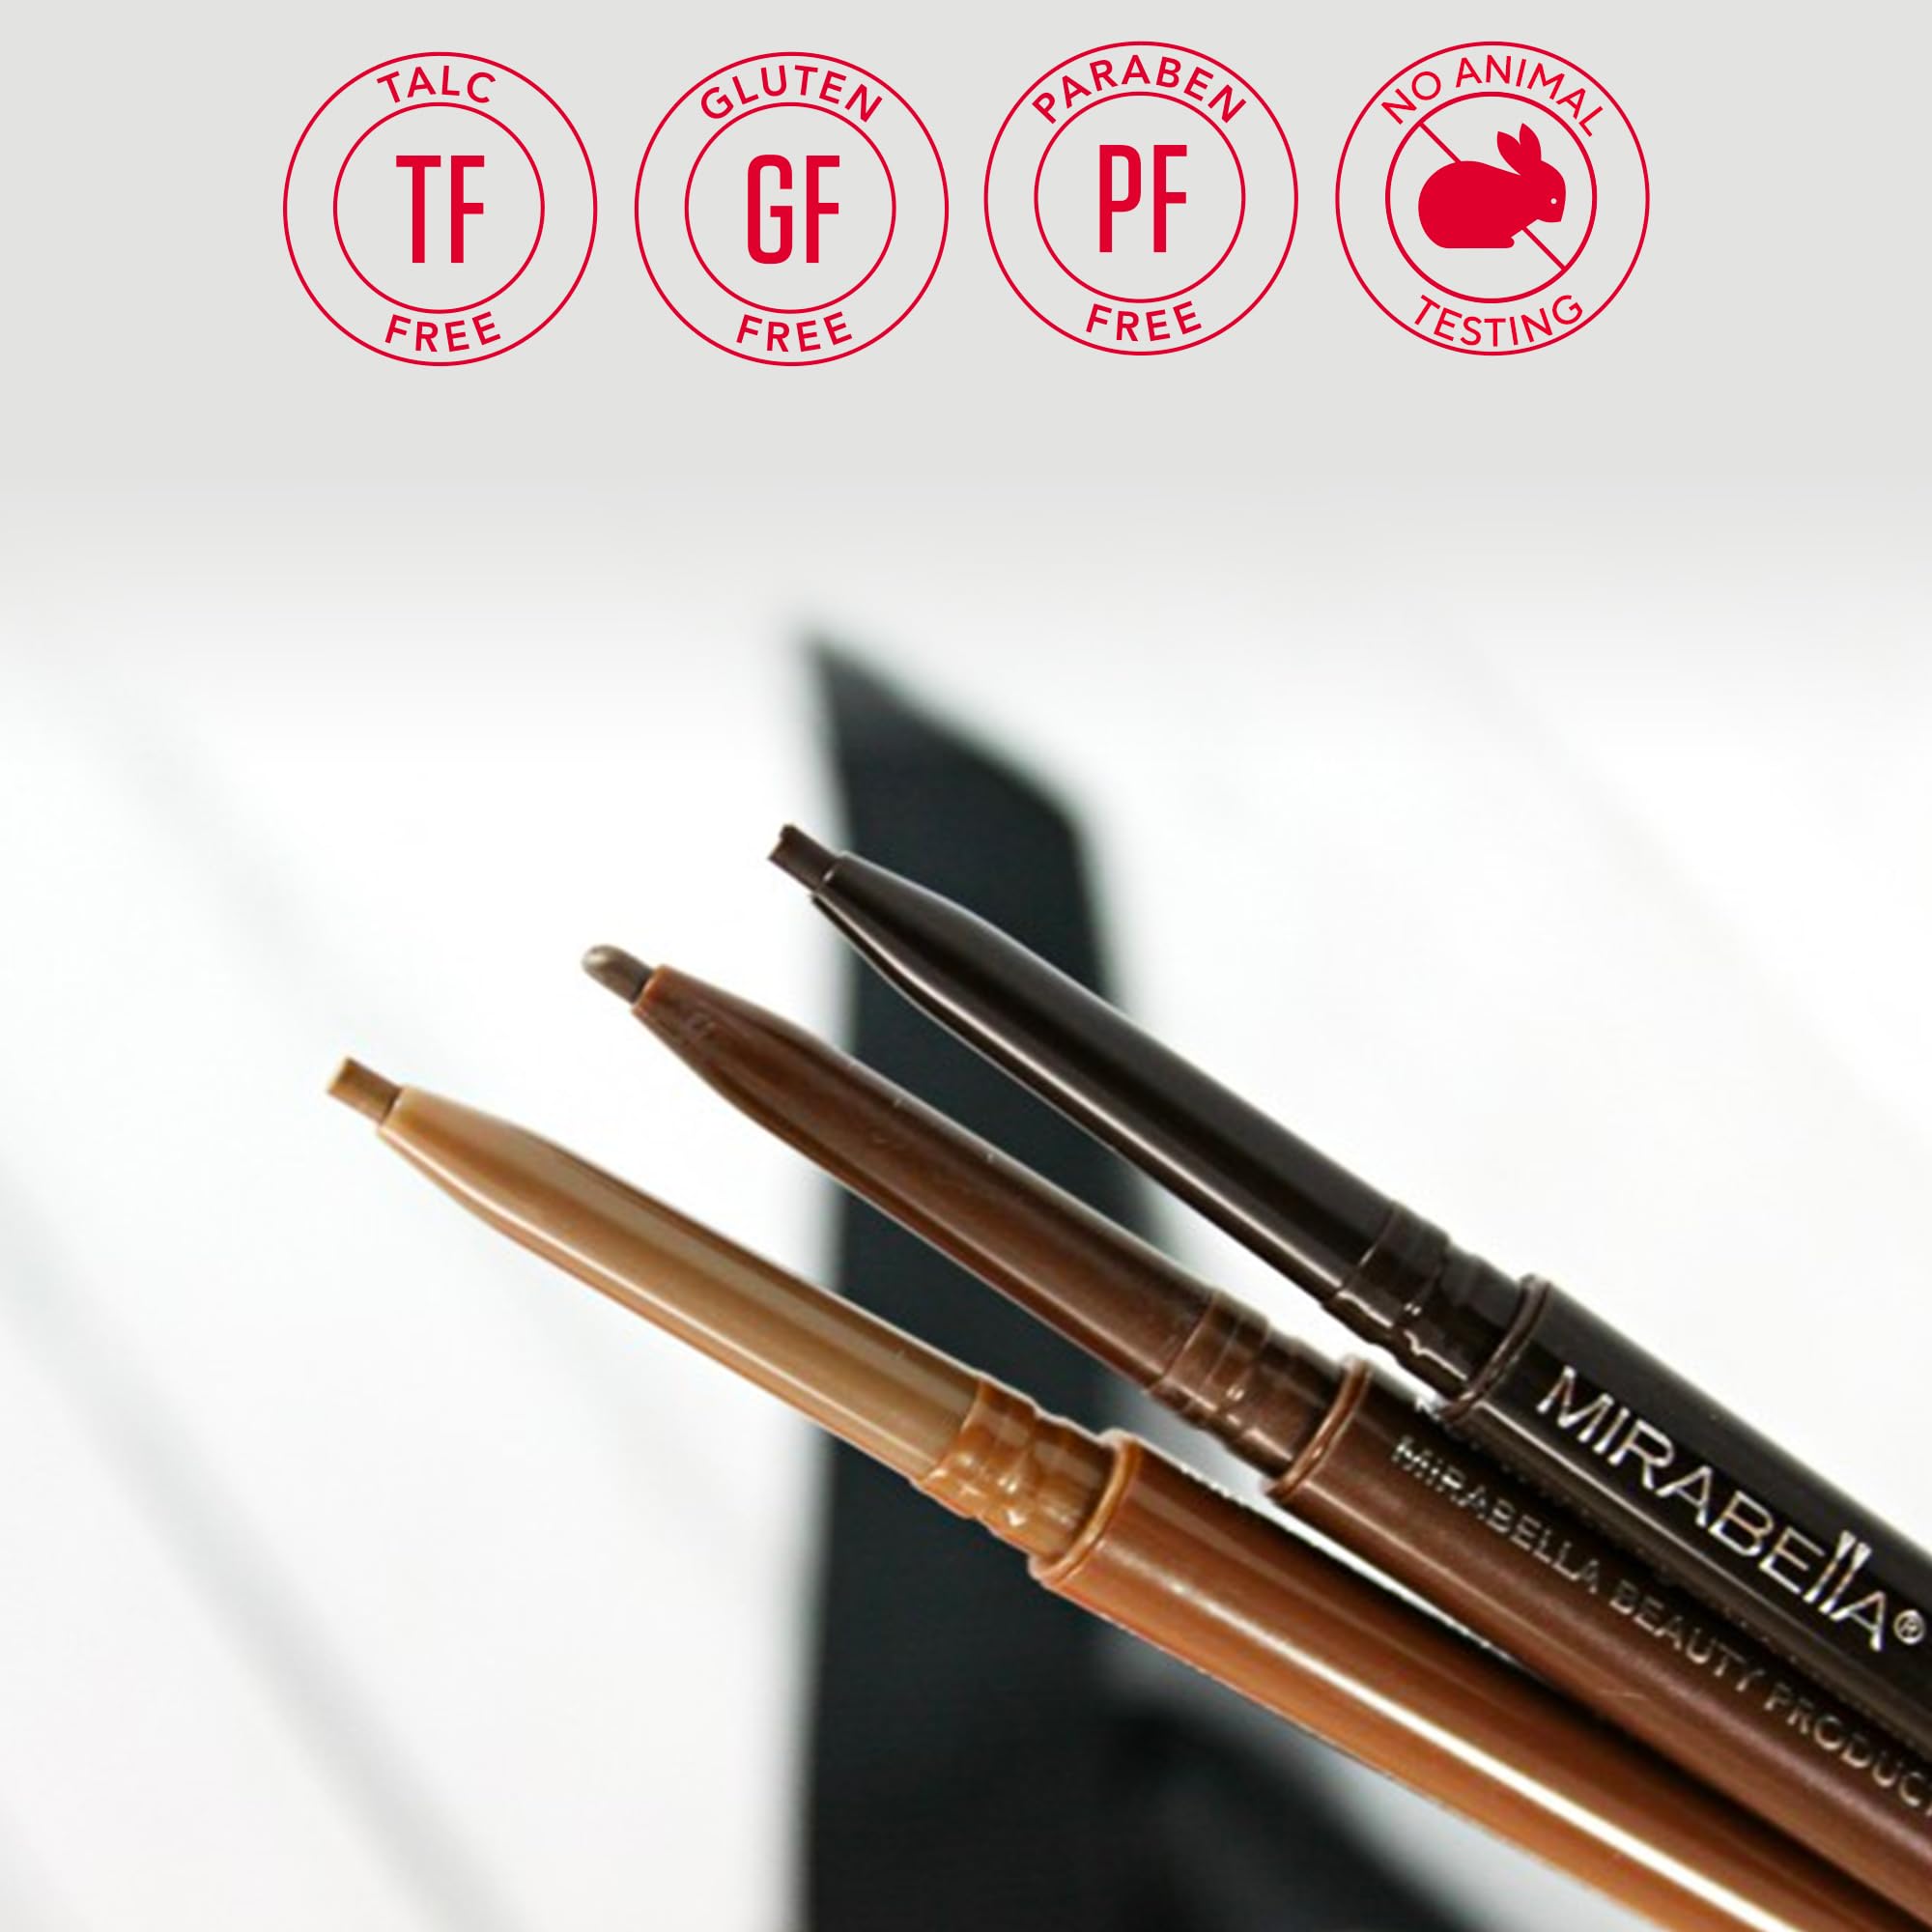 Mirabella Brow Pencil, Ultra-Fine Point Precision Waterproof Eyebrow Pencil Offers Rich, Blendable, Long-Lasting and Smudge-Proof Hair-Like Strokes to Define and Fill In Brows Naturally, Medium